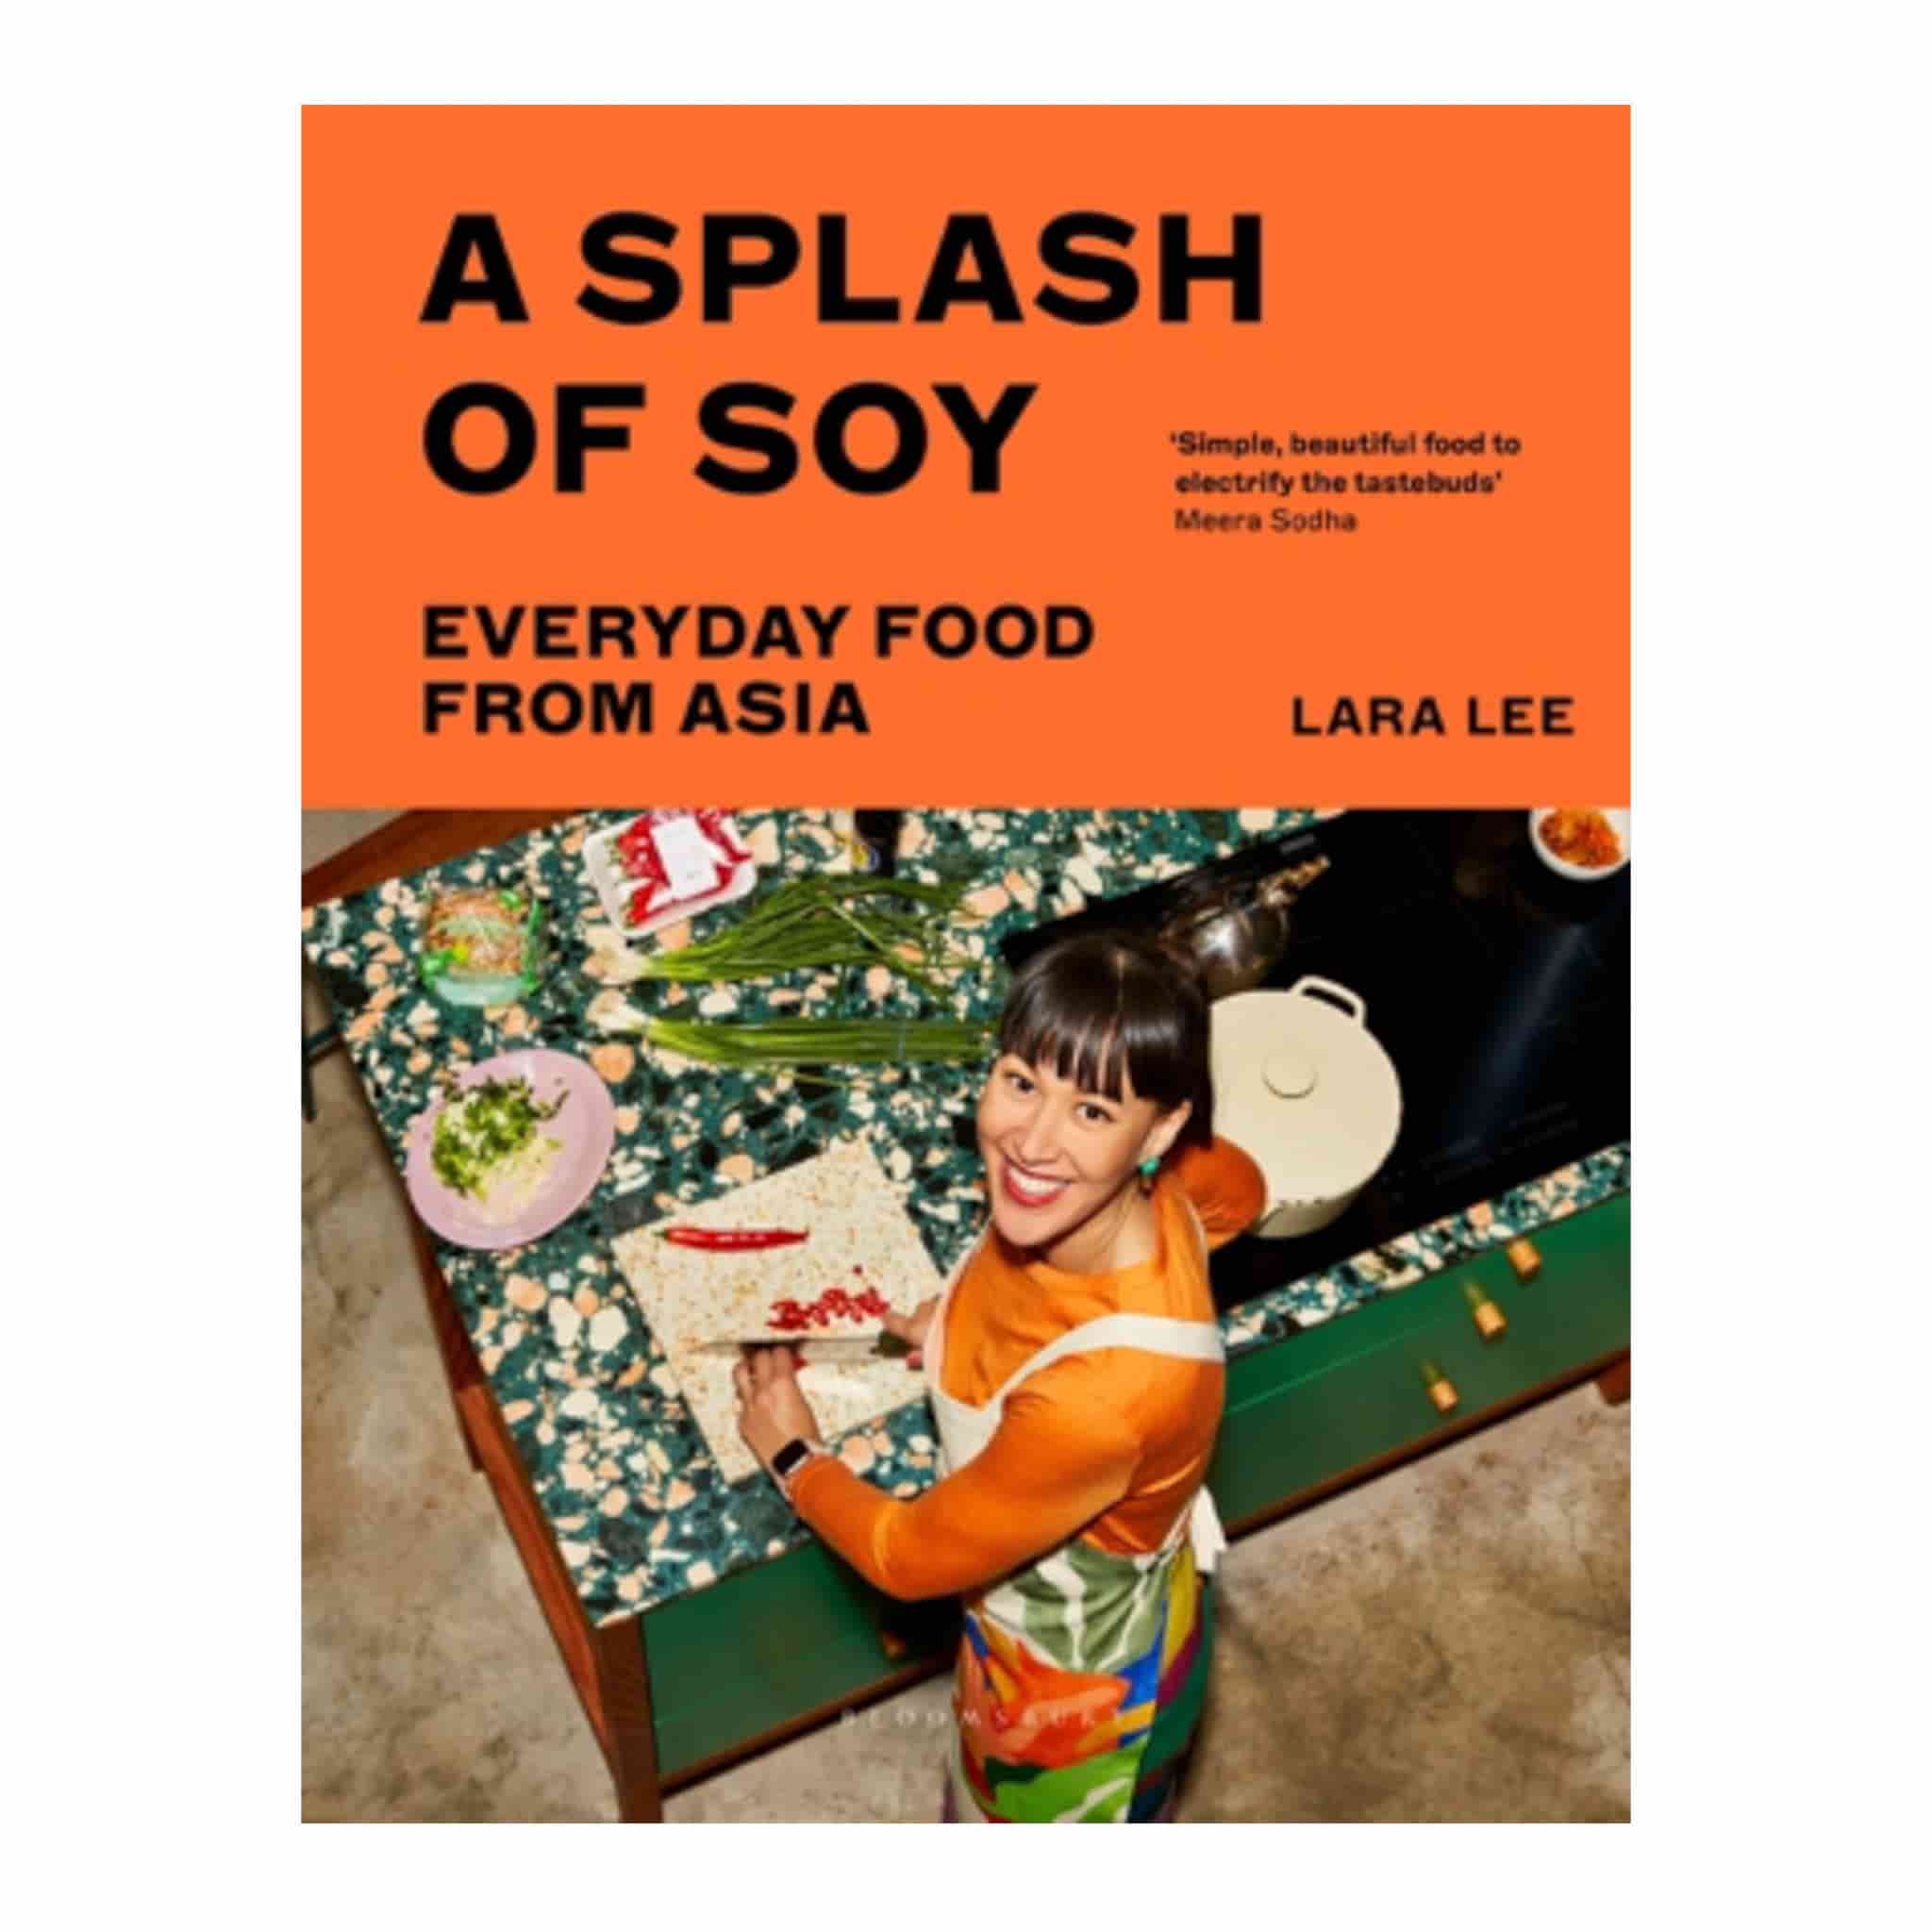 A Splash of Soy: Everyday Food from Asia, by Lara Lee